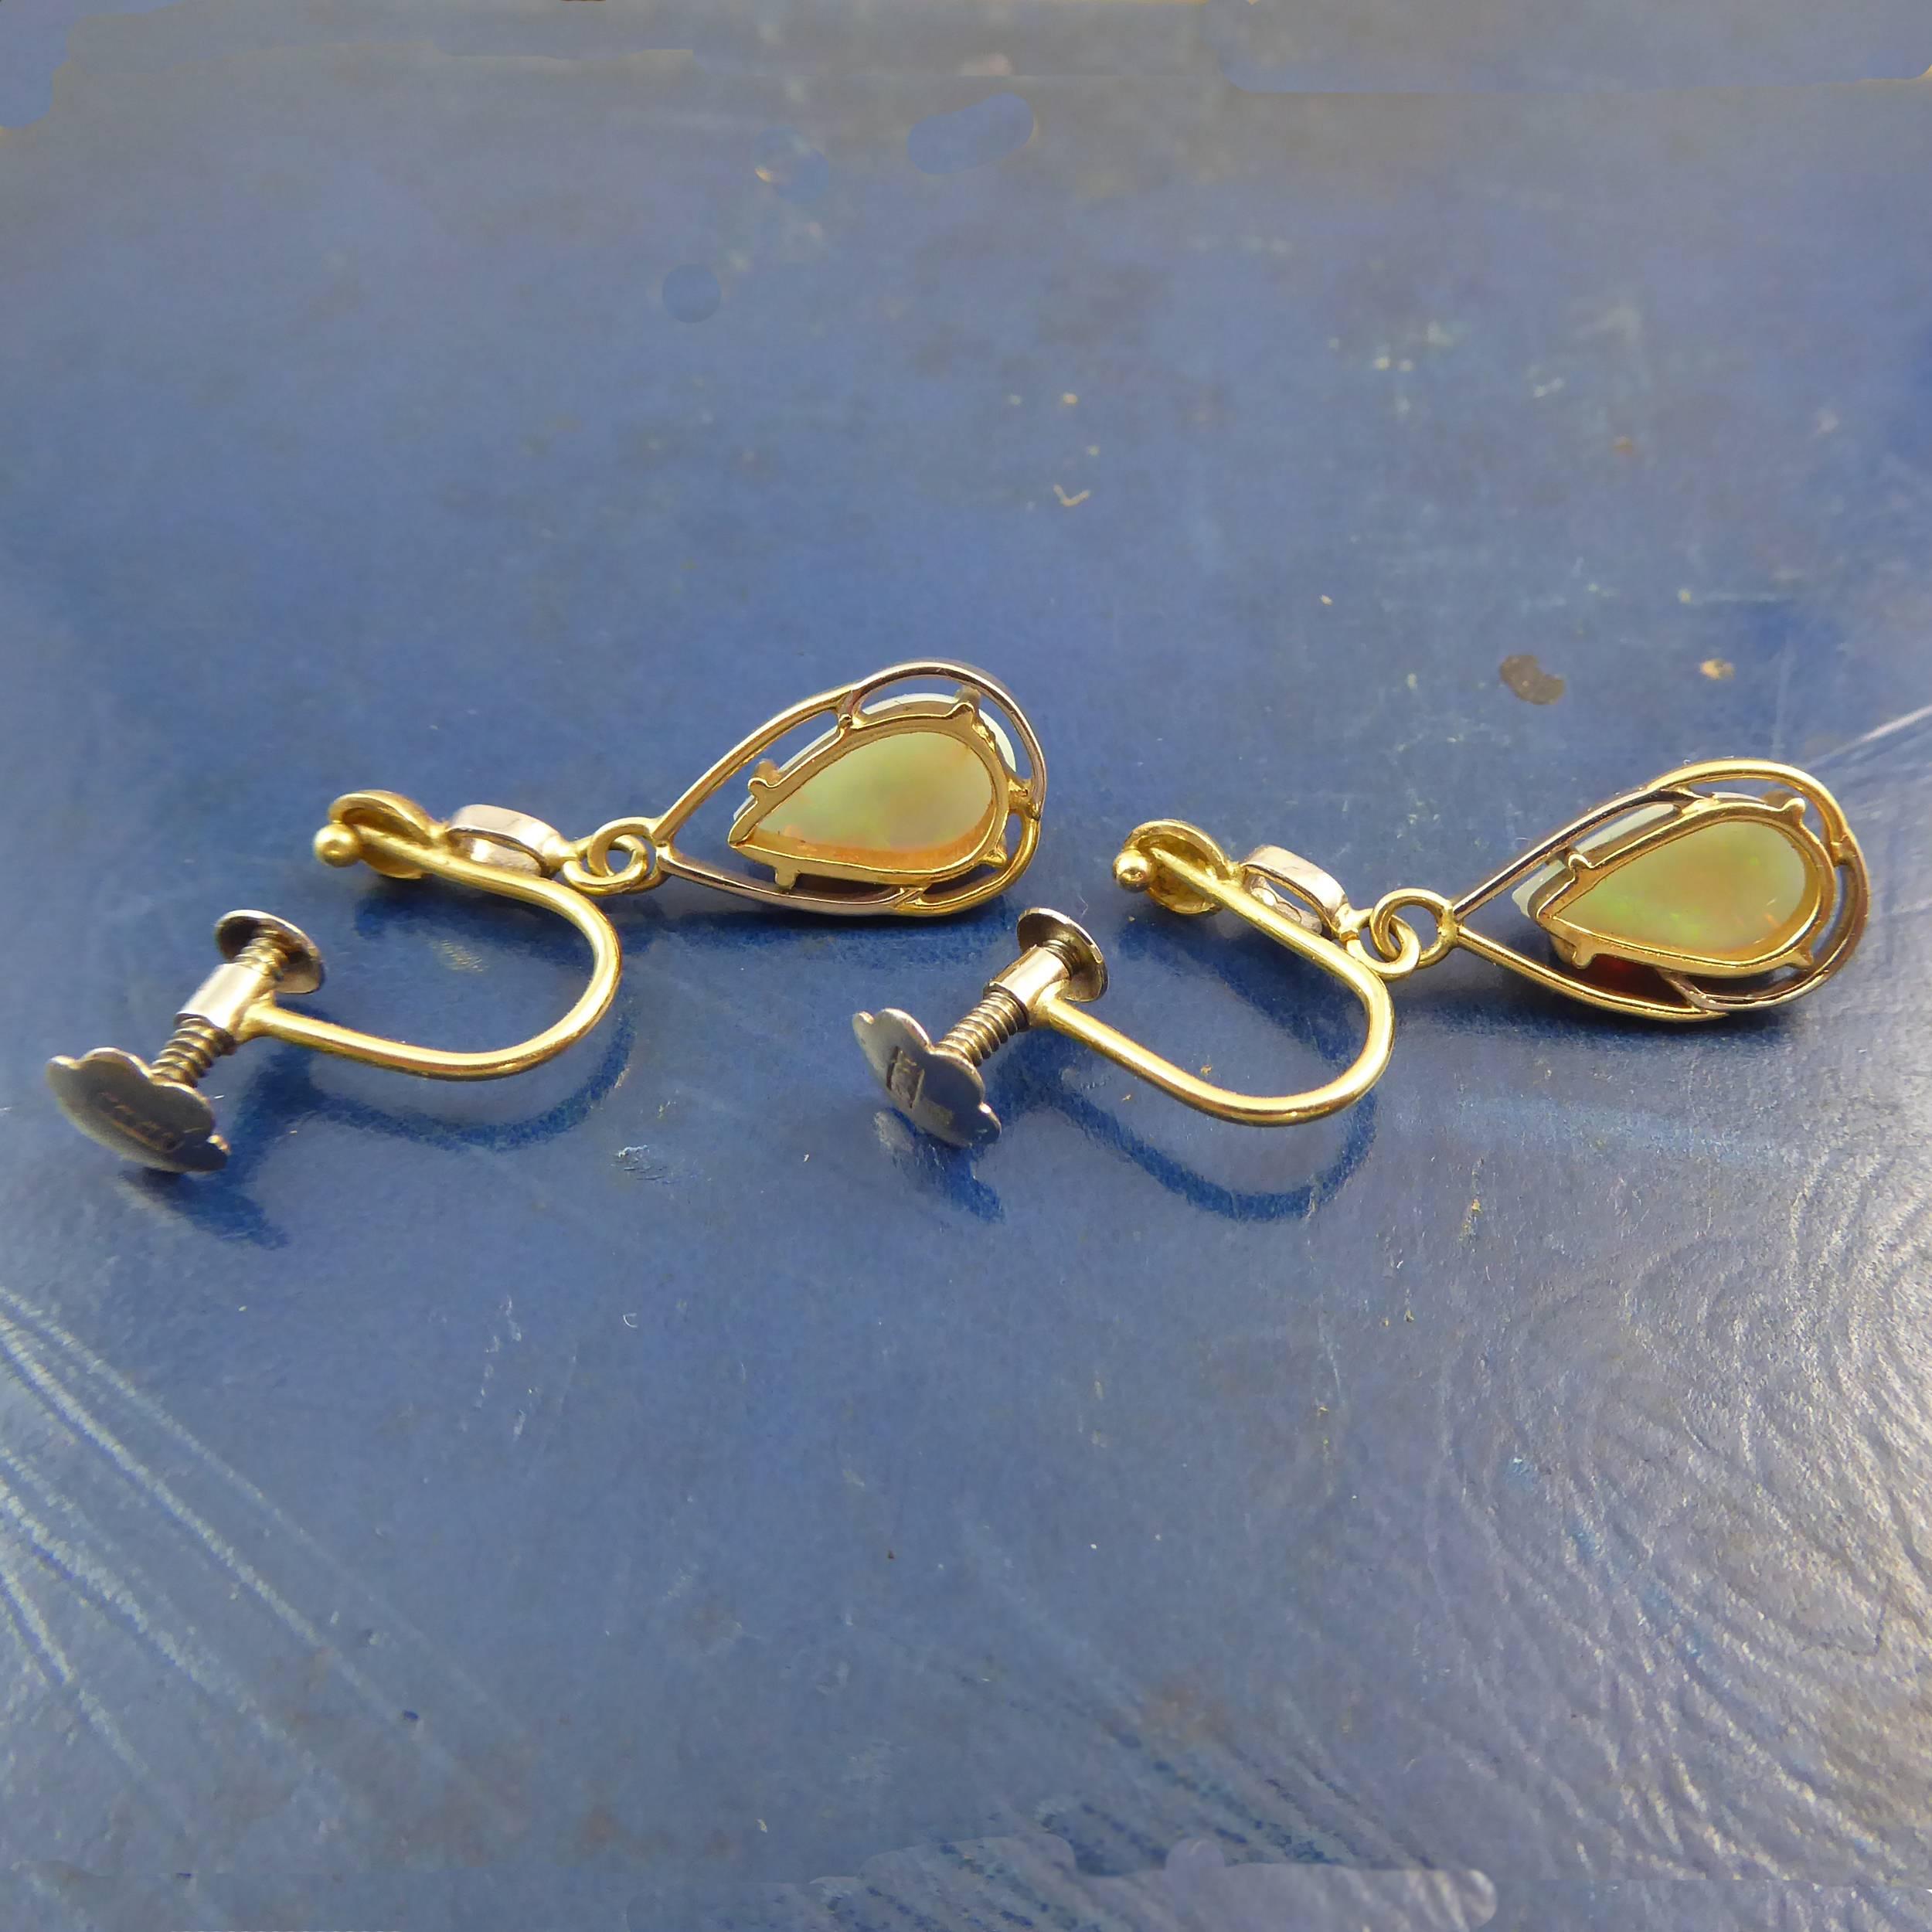 Contemporary Vintage Pear Shaped Opal Drop Earrings, 18 Carat Gold, circa 1980s